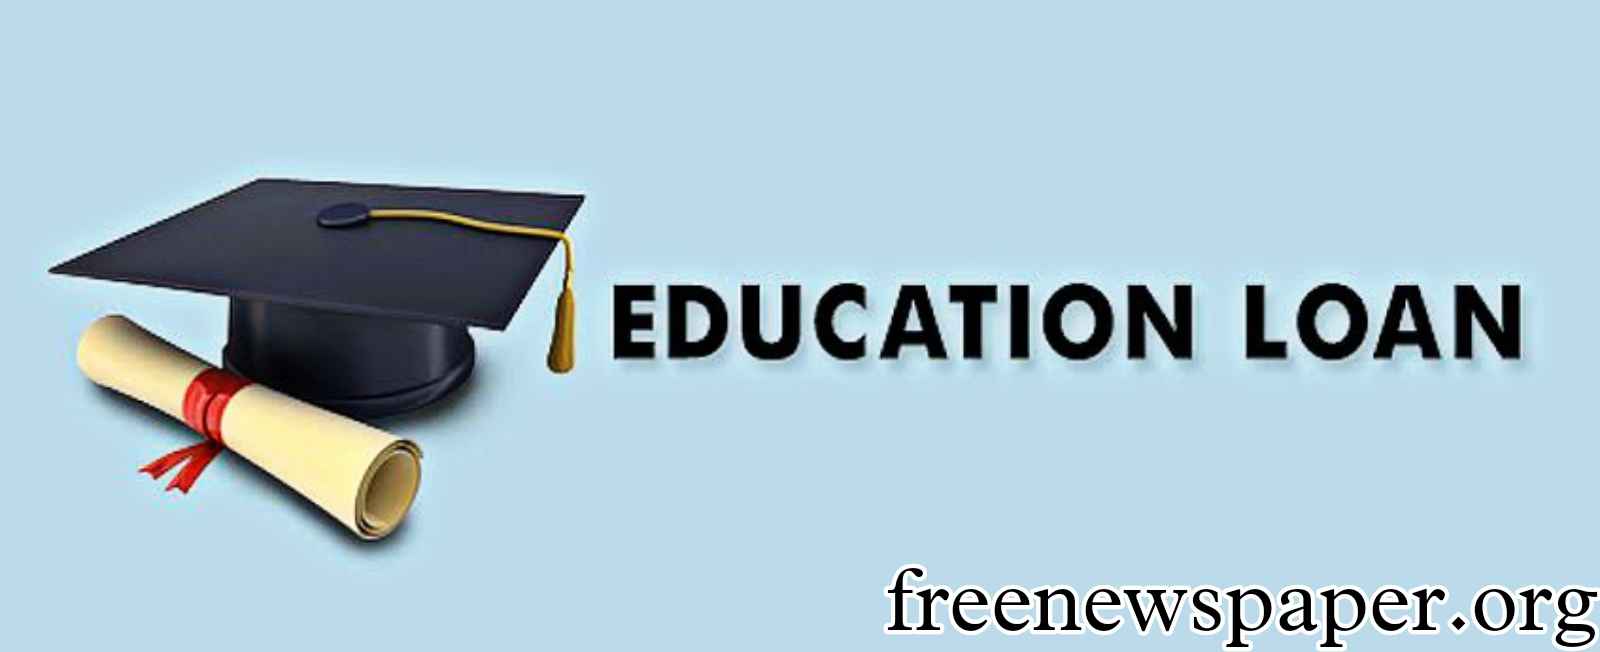 How to Apply for Education Loan in India